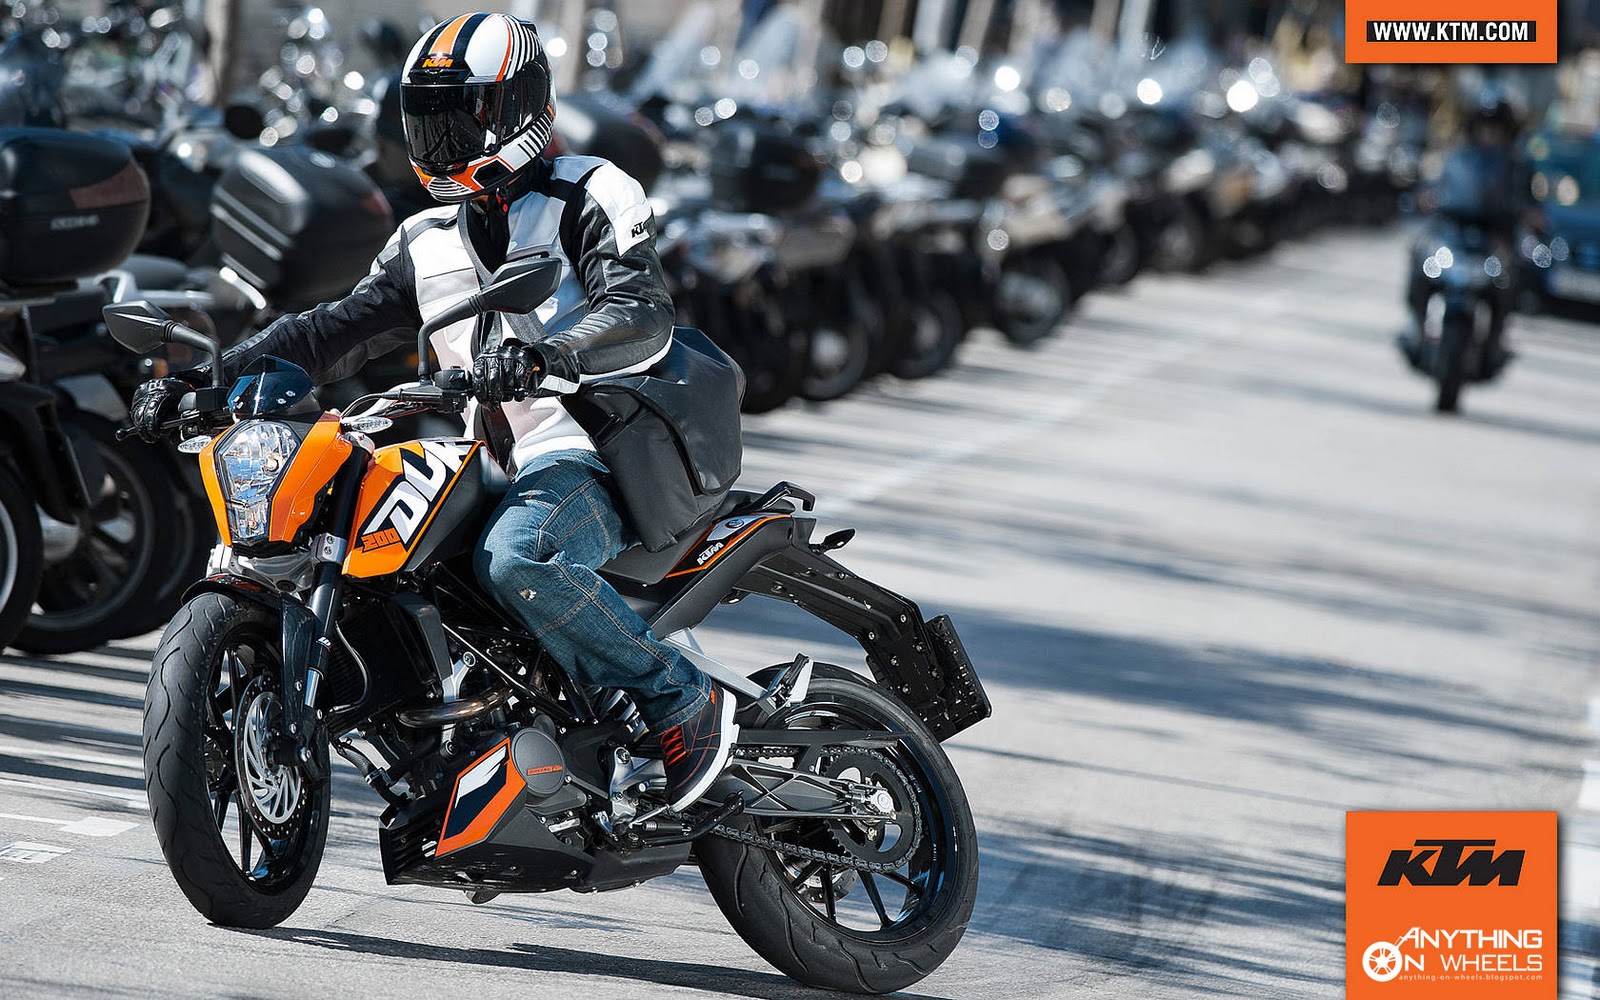 ANYTHING ON WHEELS: Bajaj Auto launches KTM Duke 200 with shock pricing